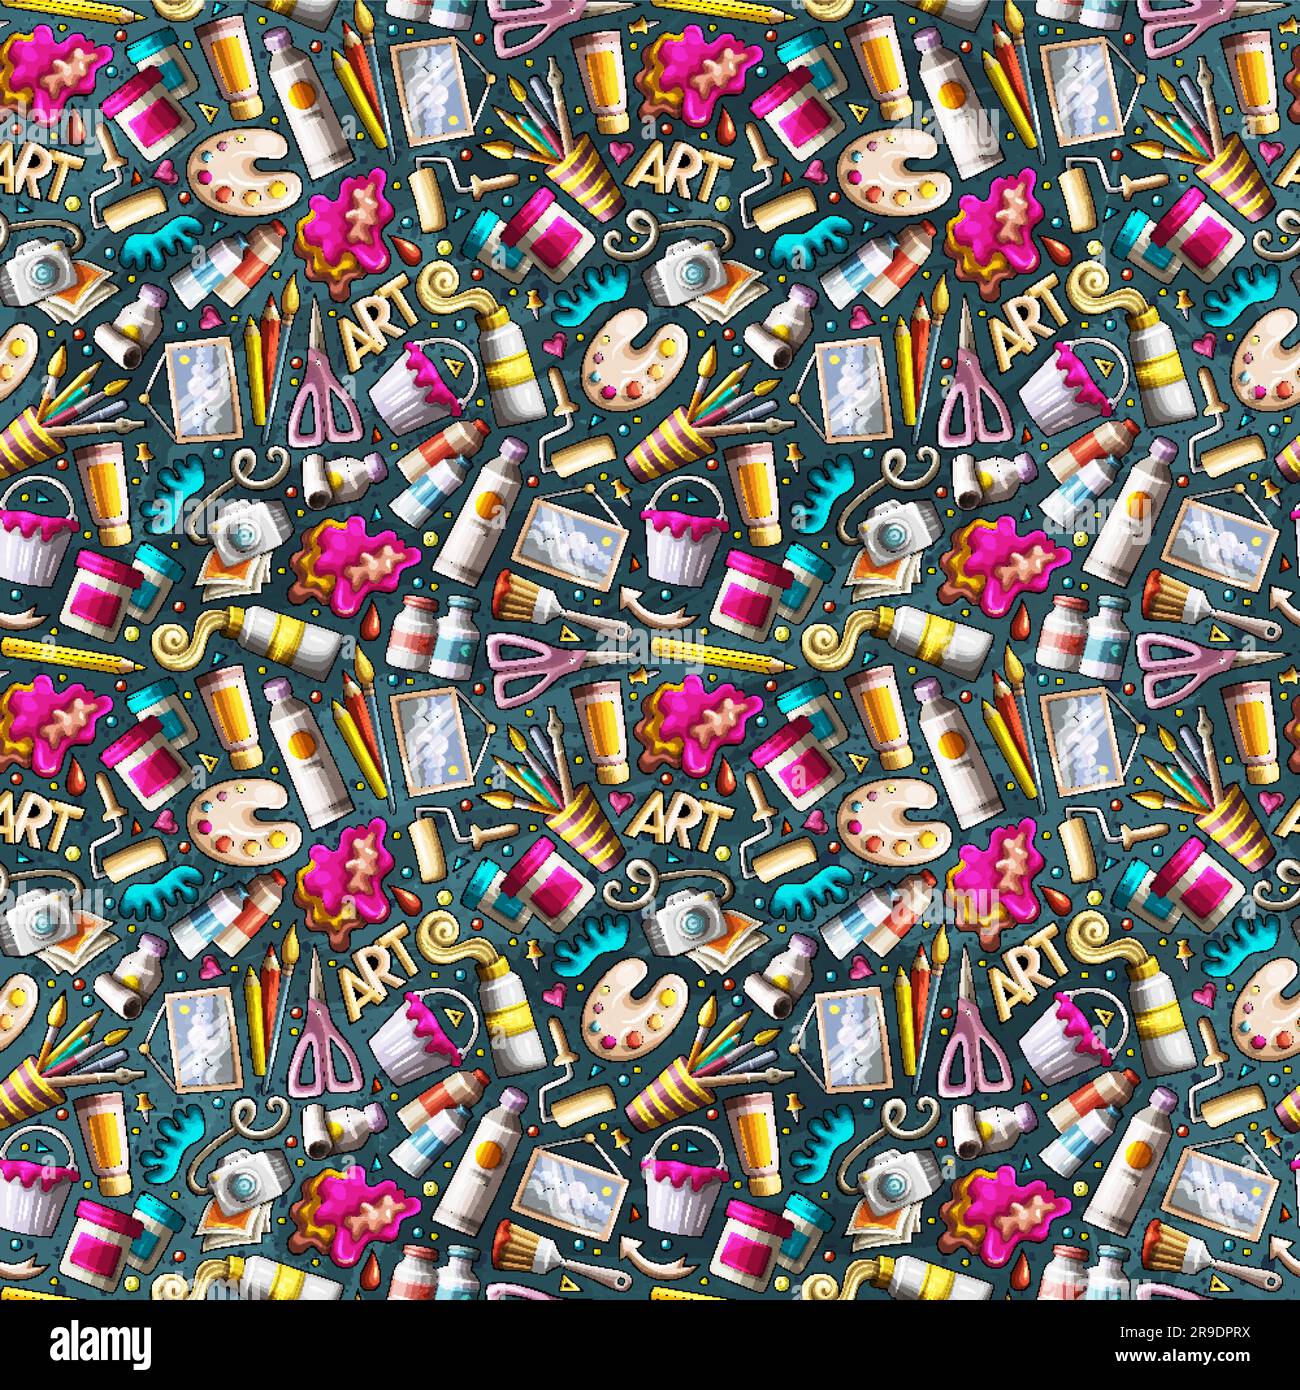 https://c8.alamy.com/comp/2R9DPRX/cartoon-cute-artist-supplies-seamless-pattern-colorful-detailed-with-lots-of-objects-art-background-endless-funny-illustration-2R9DPRX.jpg